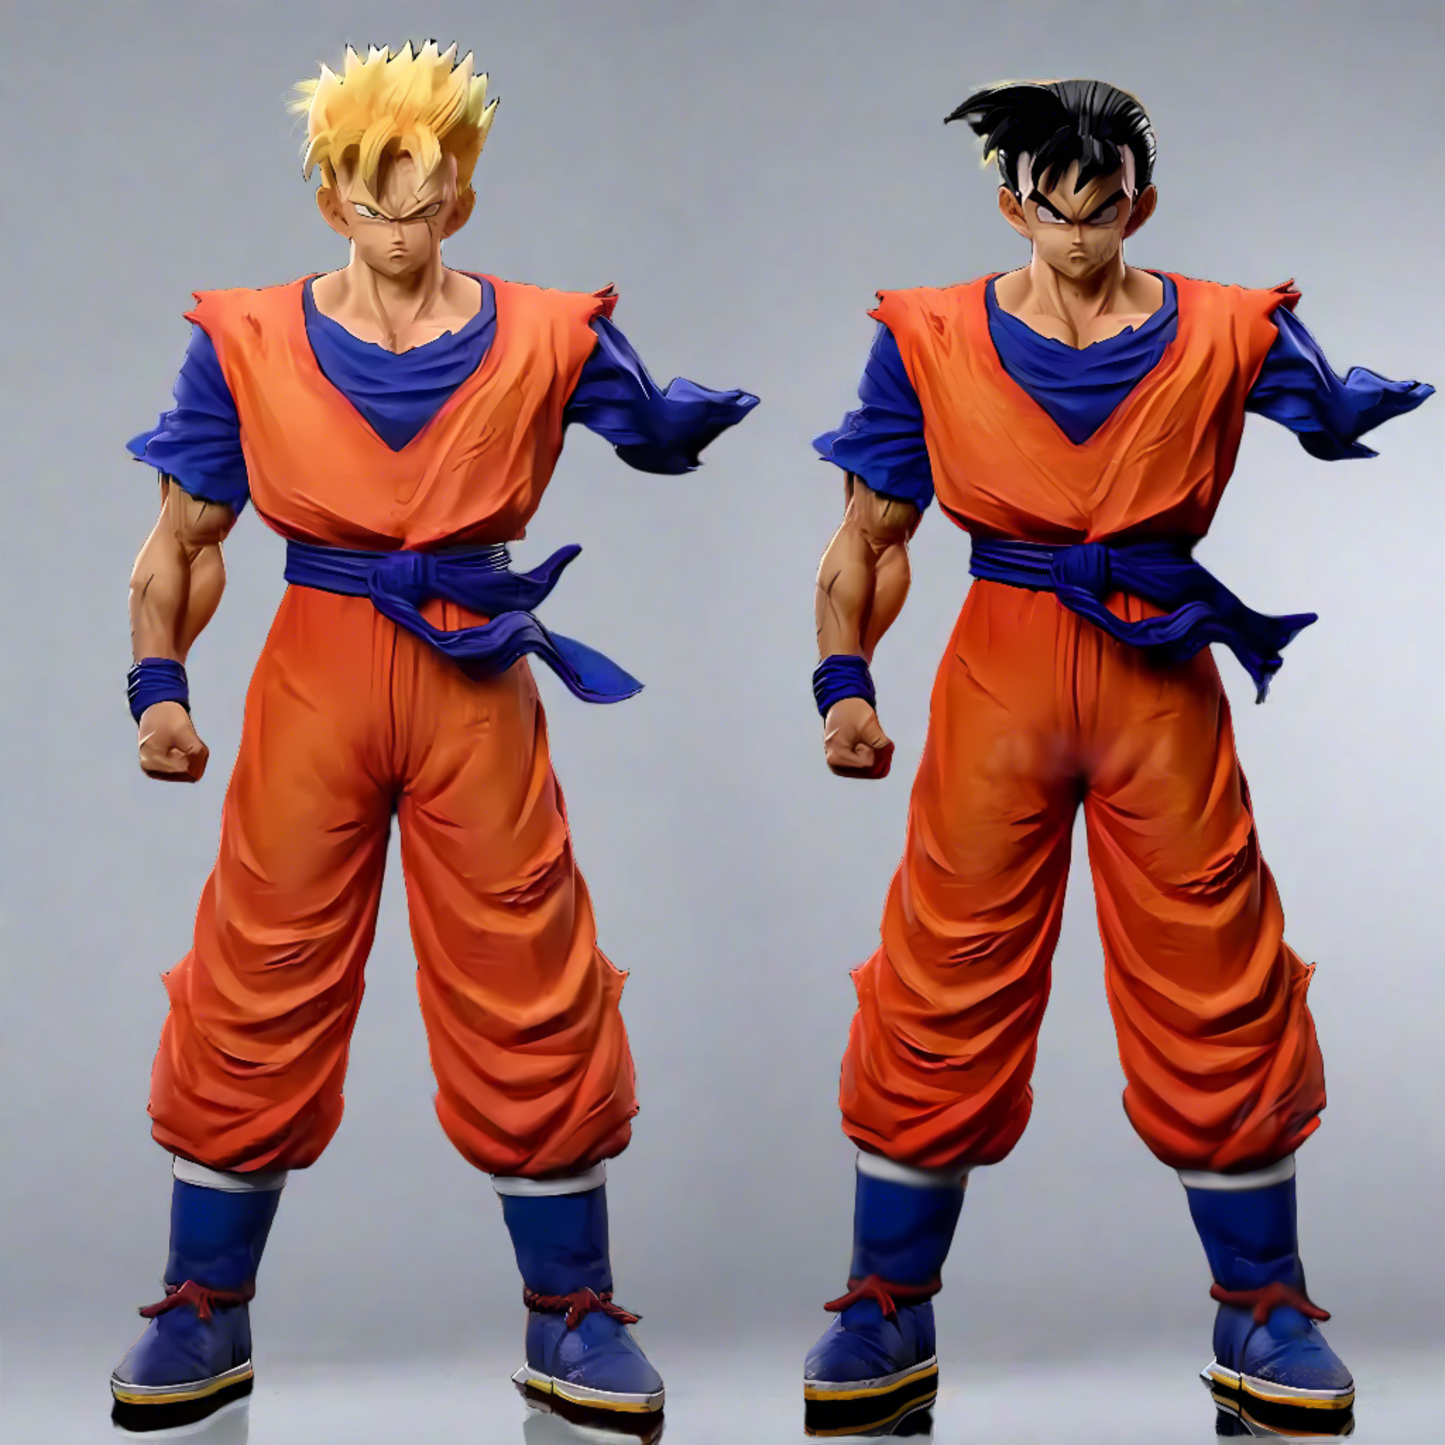 Dragon Ball figures depicting Gohan in Super Saiyan form facing forward with determination, alongside Goku, against a dark backdrop, ready for the ultimate fight.